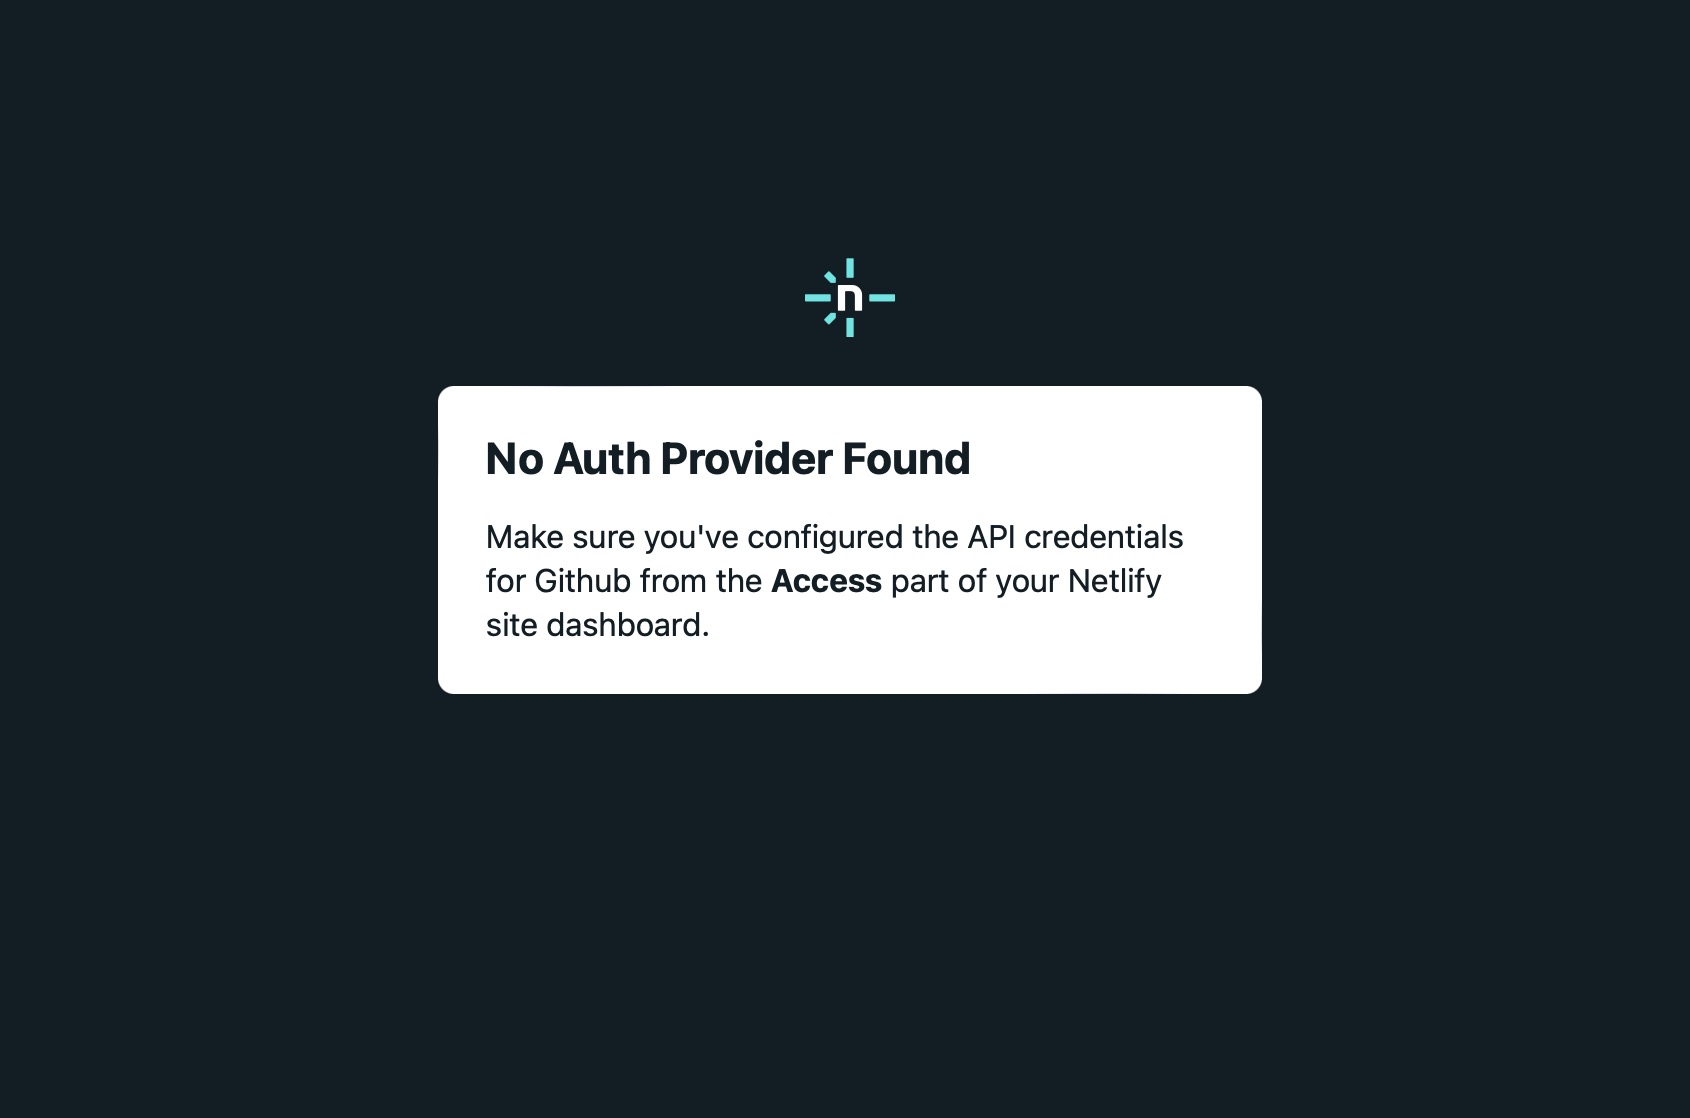 If you click in Login with GitHub, you get and error pointing you to access your netlify panel and add Github as an Auth Provider